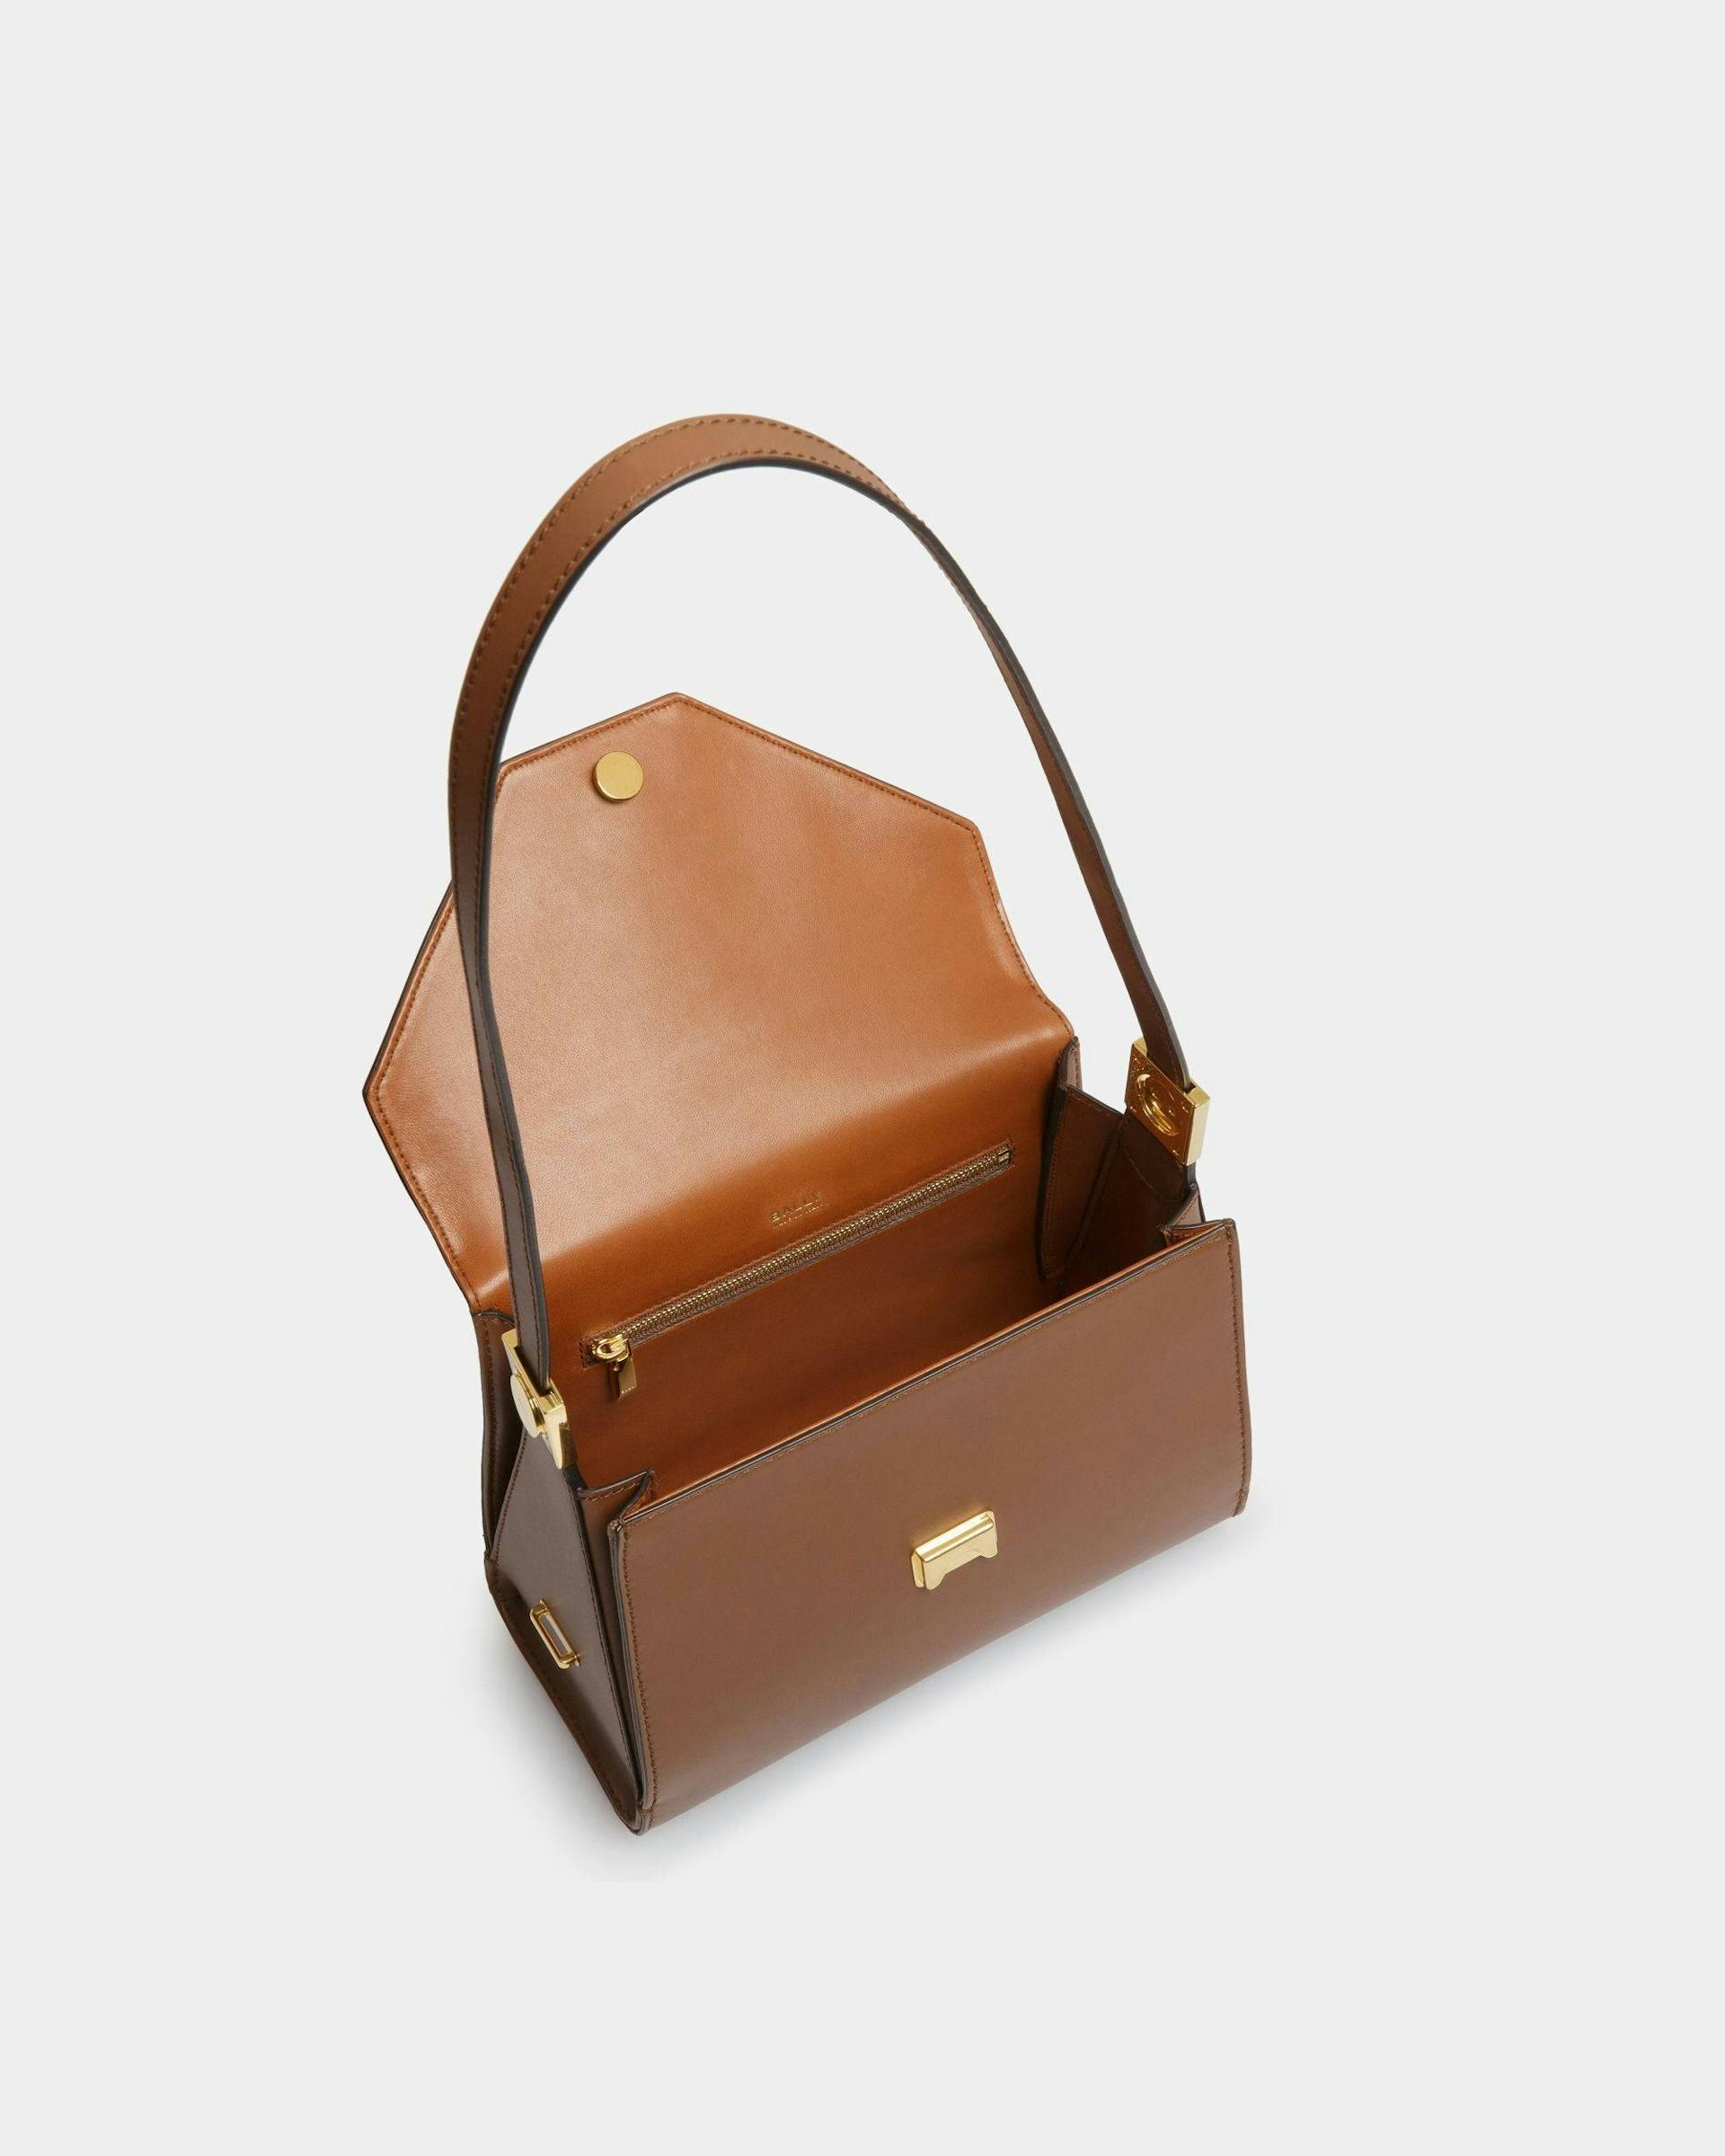 Women's Emblem Top Handle Bag In Brown Leather | Bally | Still Life Open / Inside